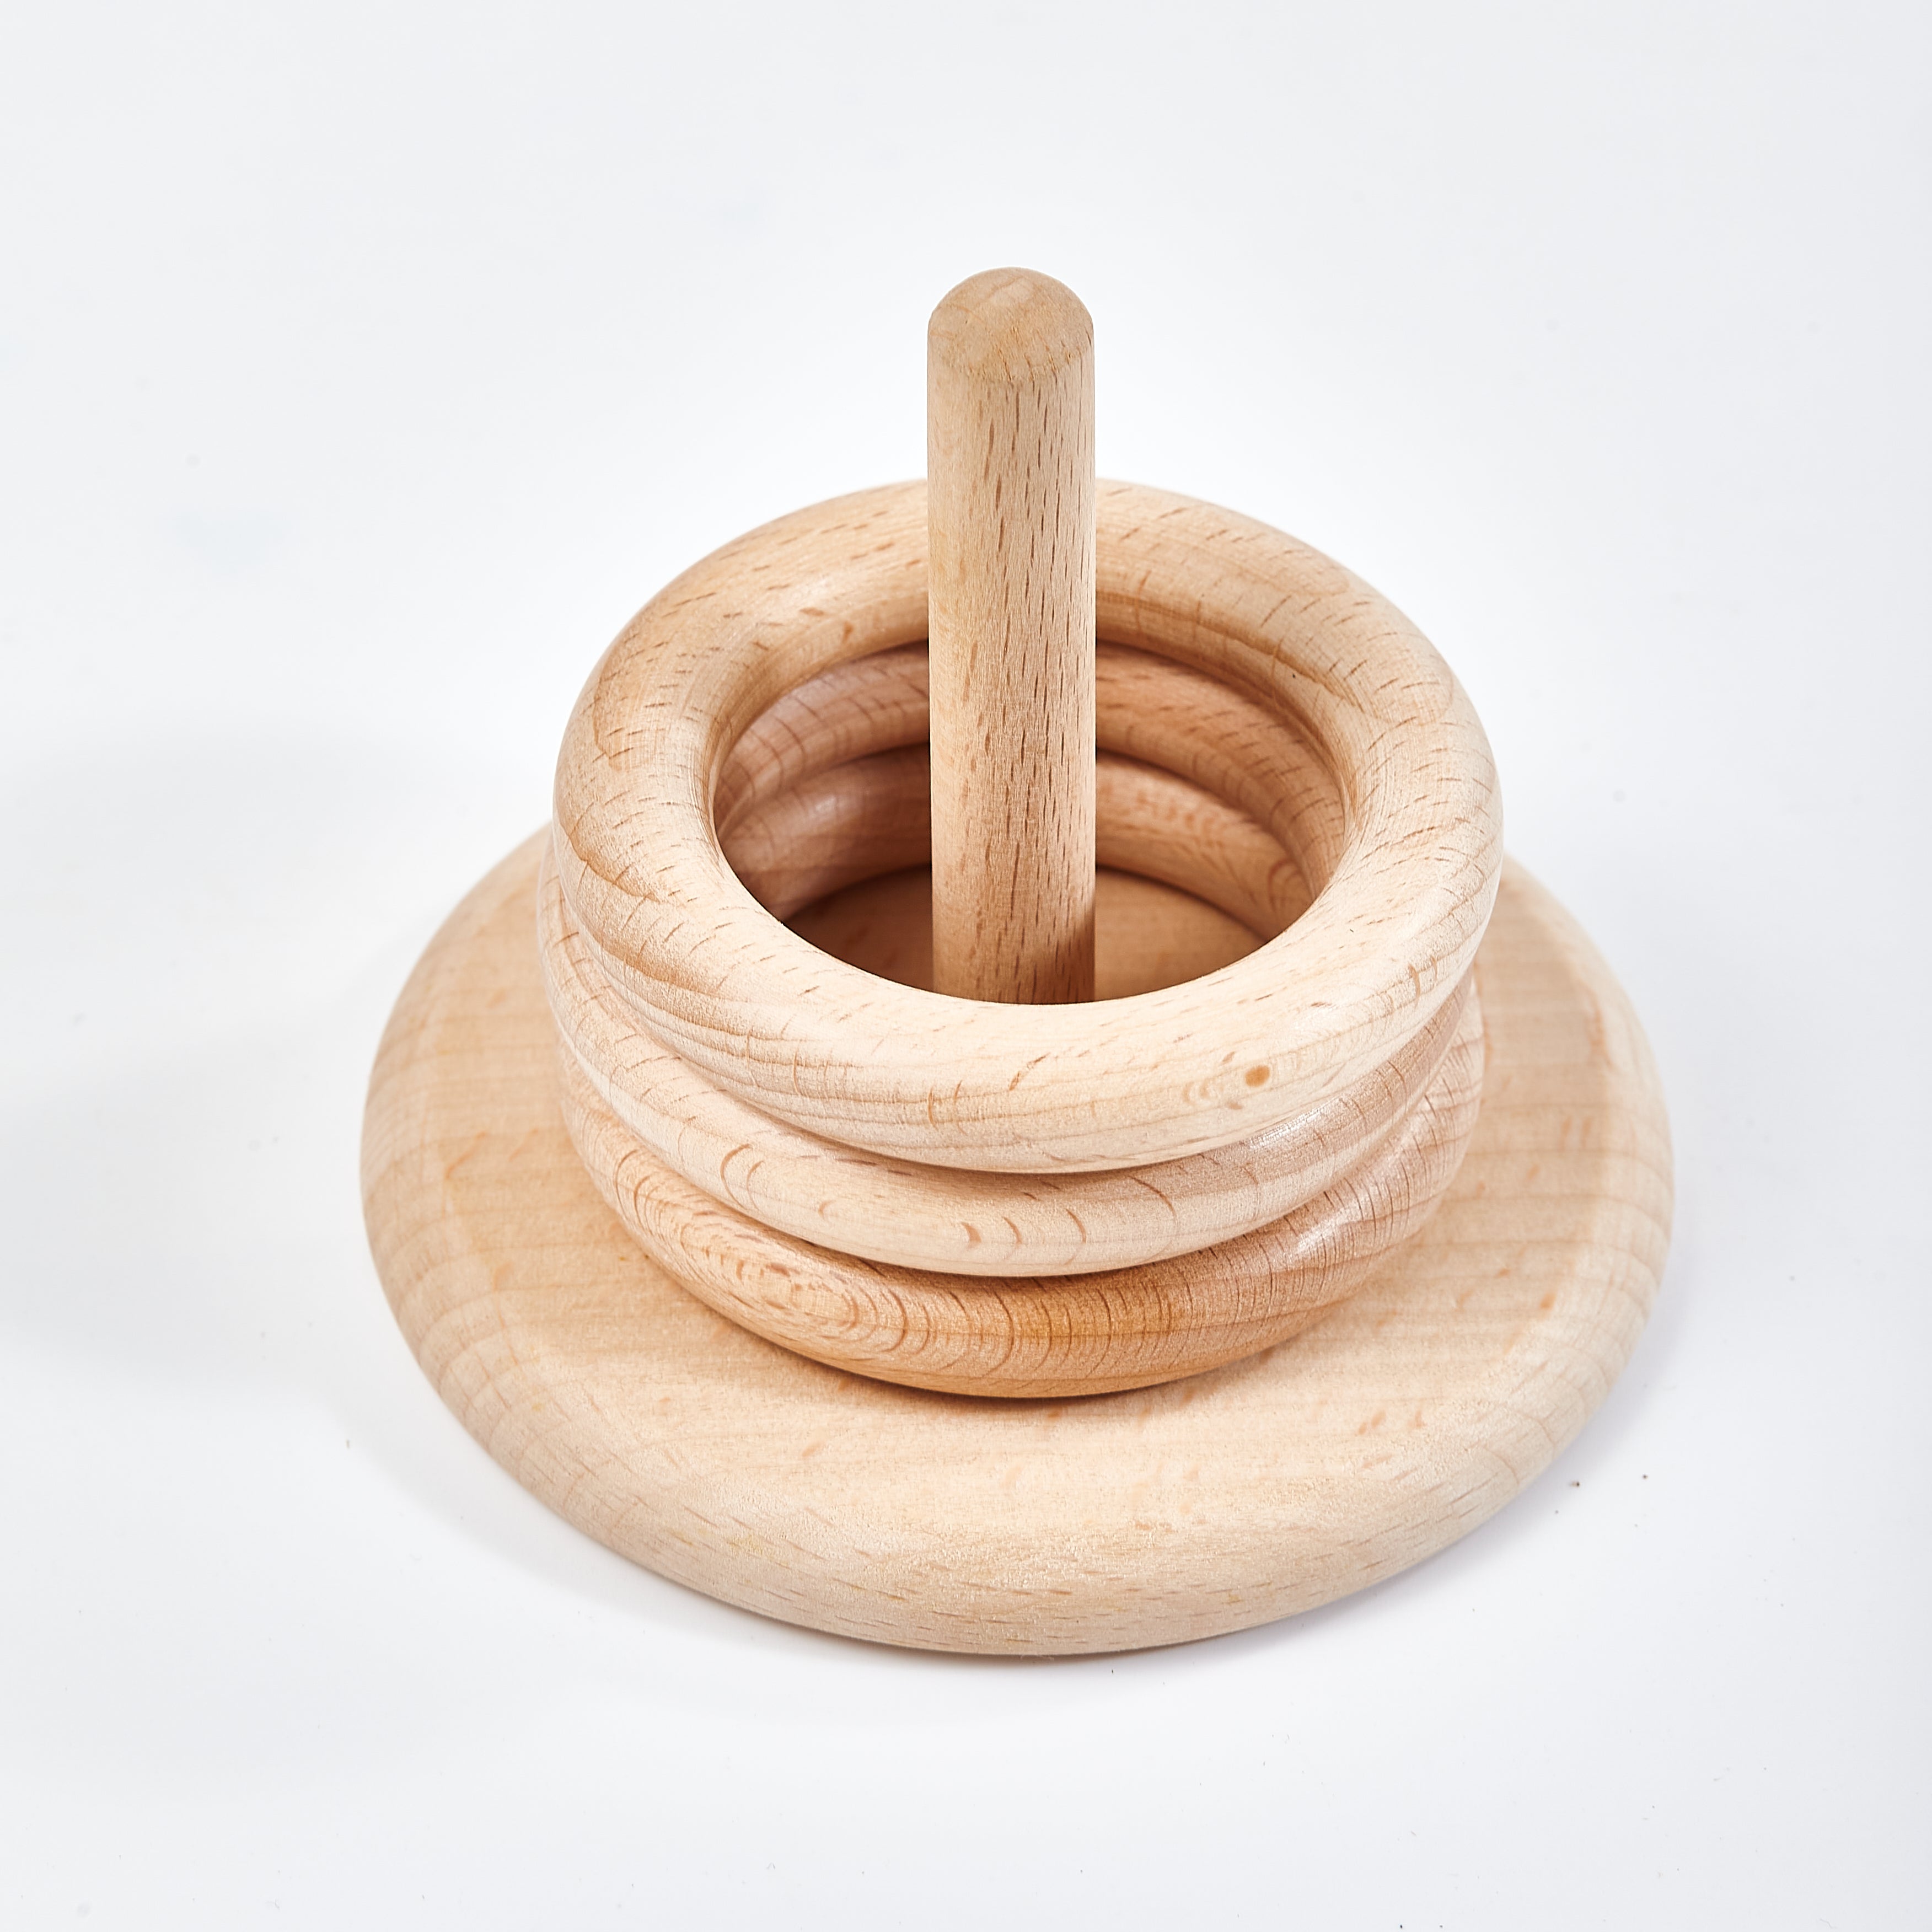 Wooden stacking rings for babies and toddlers